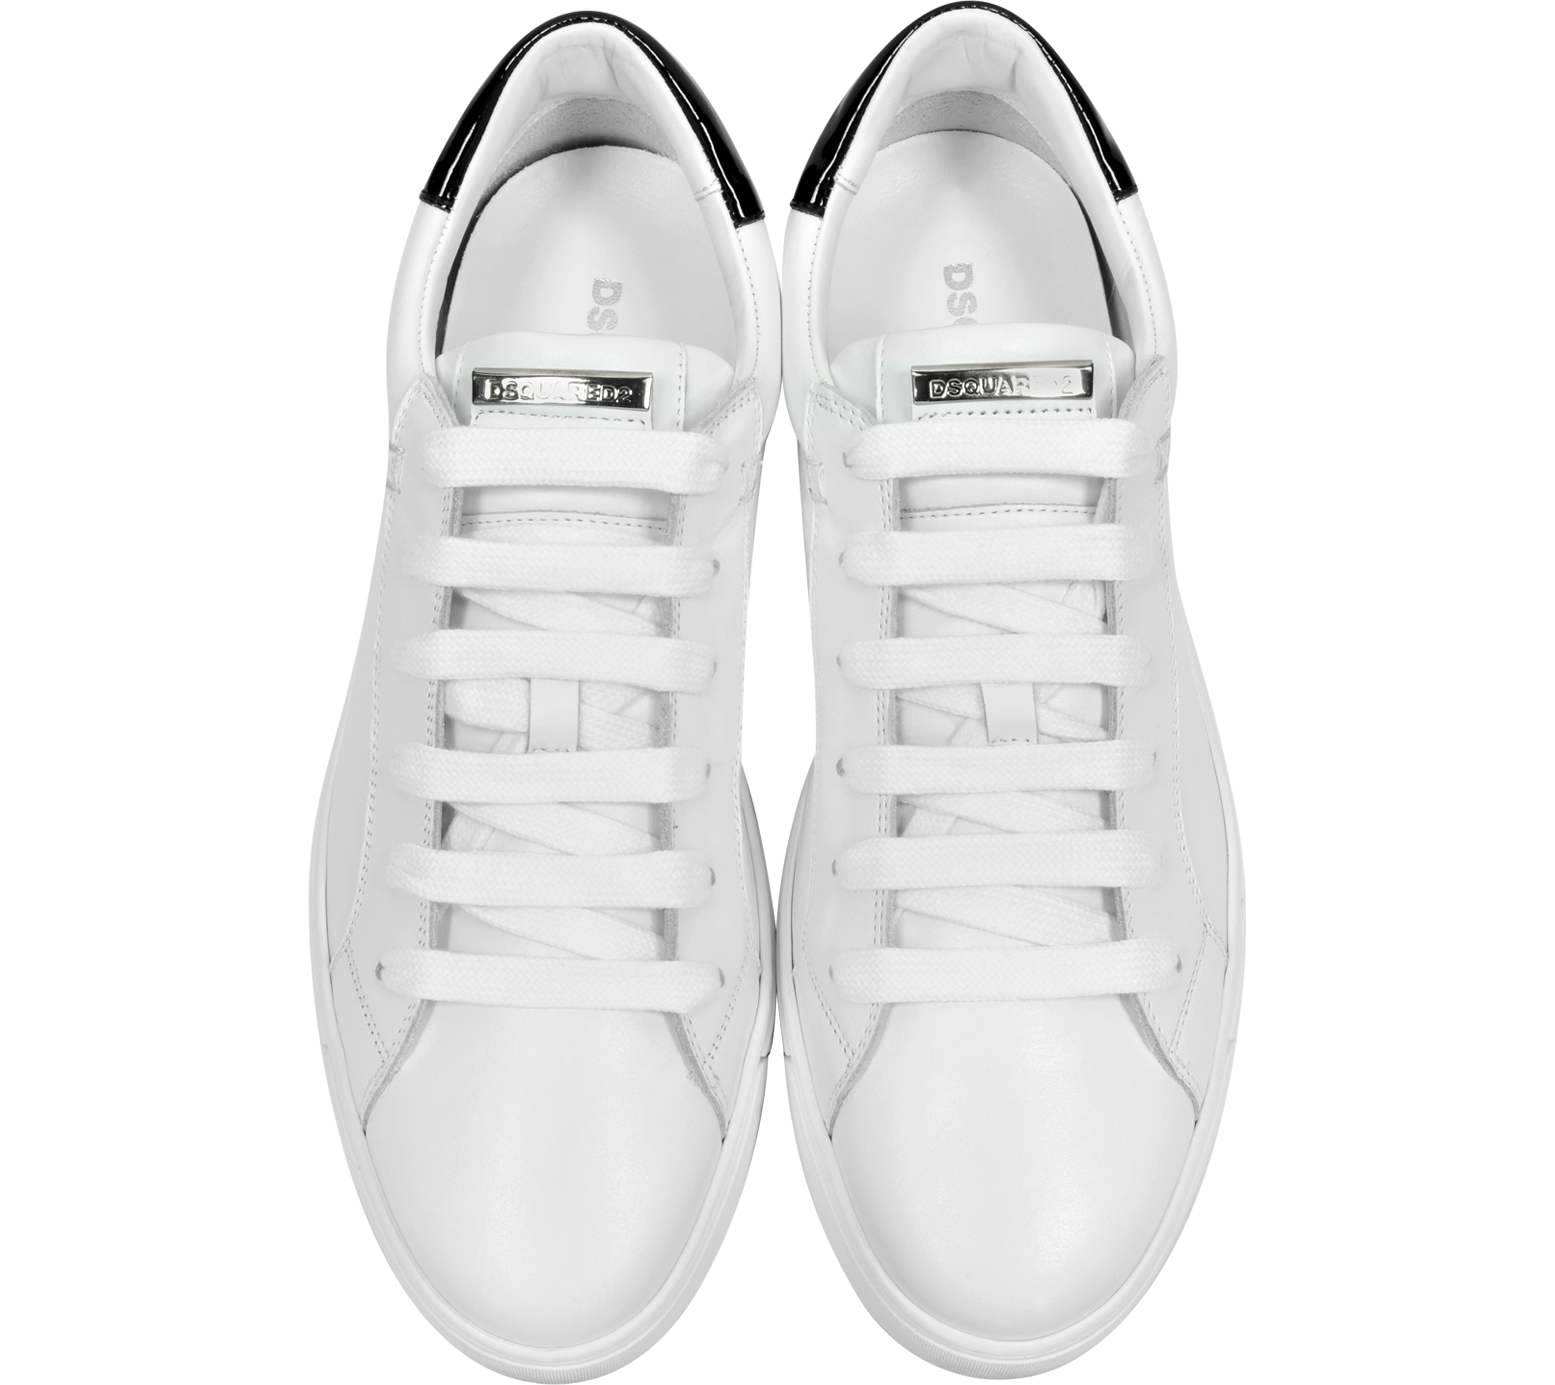 DSquared2 Tennis Club White Leather and Black Patent Leather Men's ...